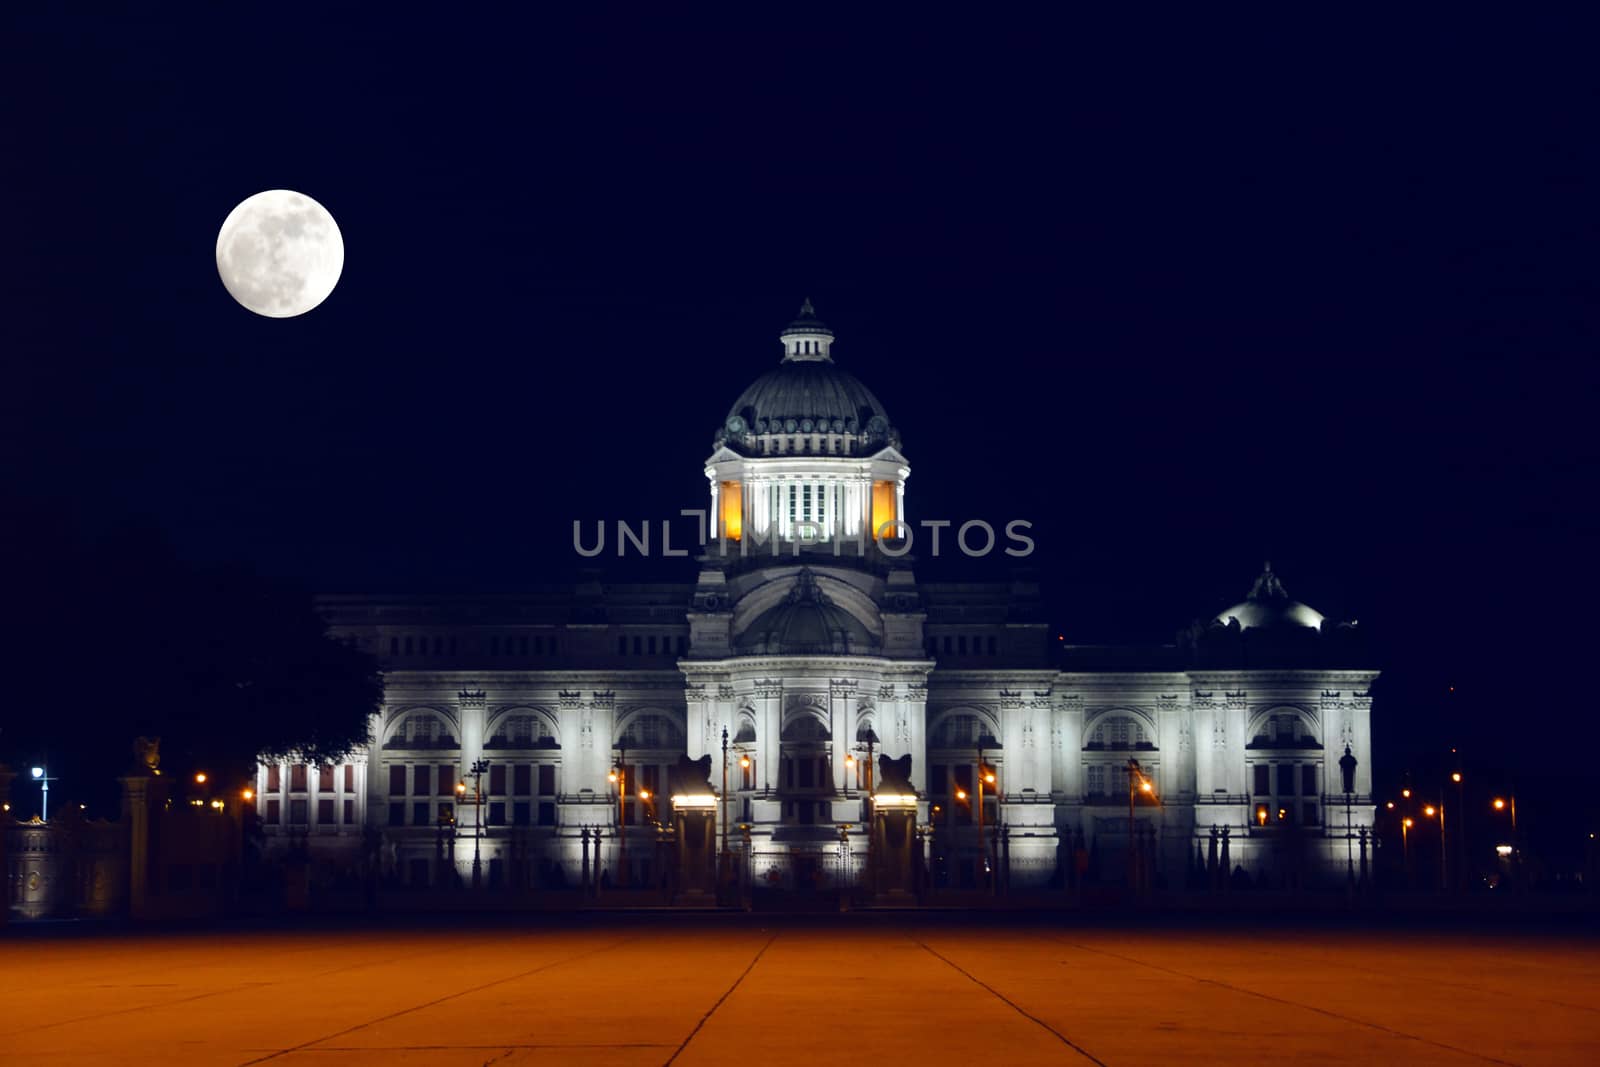 The Throne Hall in Bangkok with super moon / full moon by ideation90